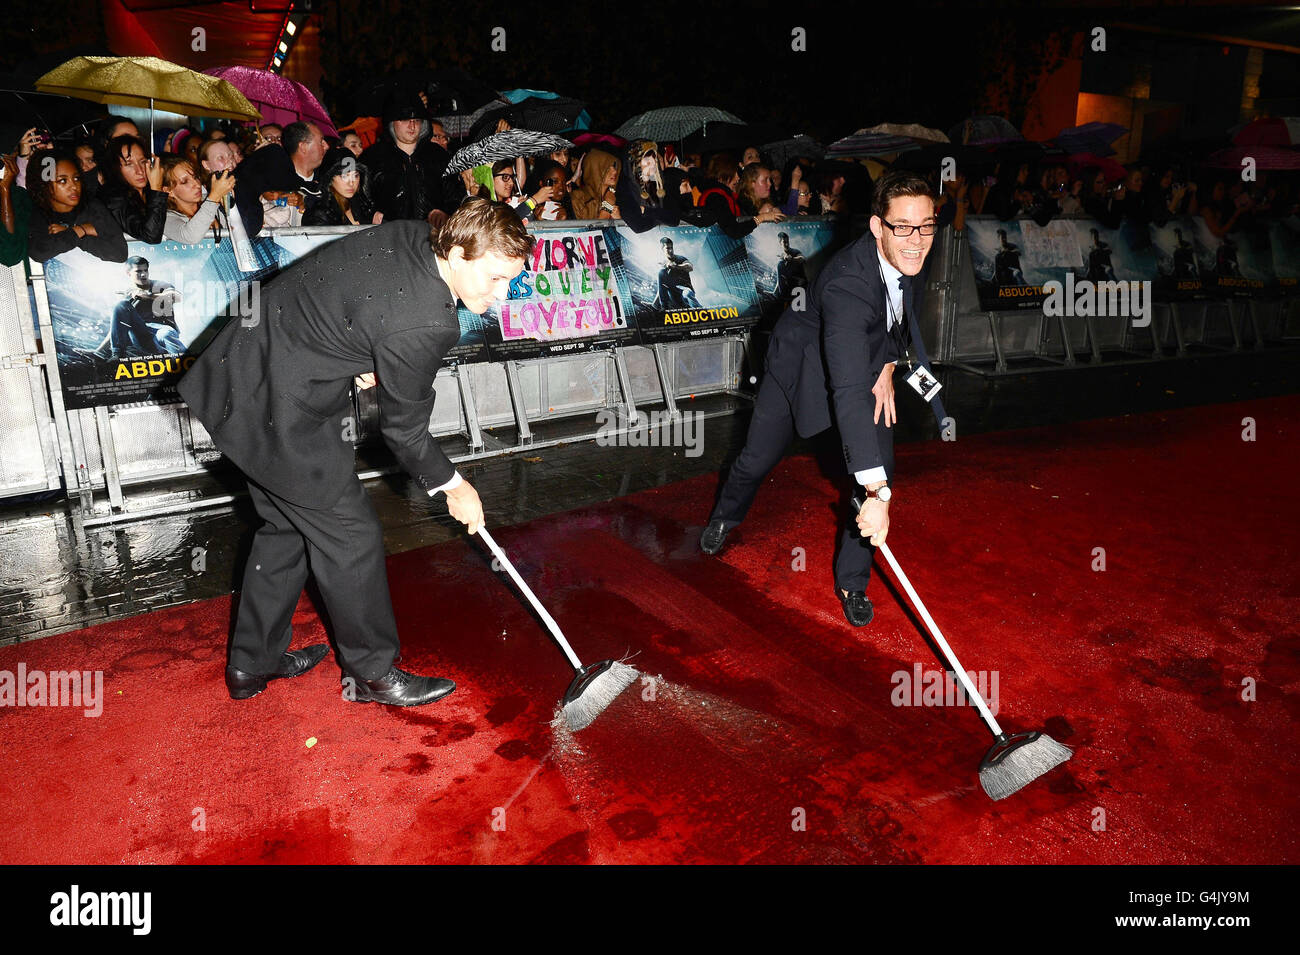 Rain water is swept off the red carpet before the premiere of new film Abduction at the IMAX cinema in London. Stock Photo